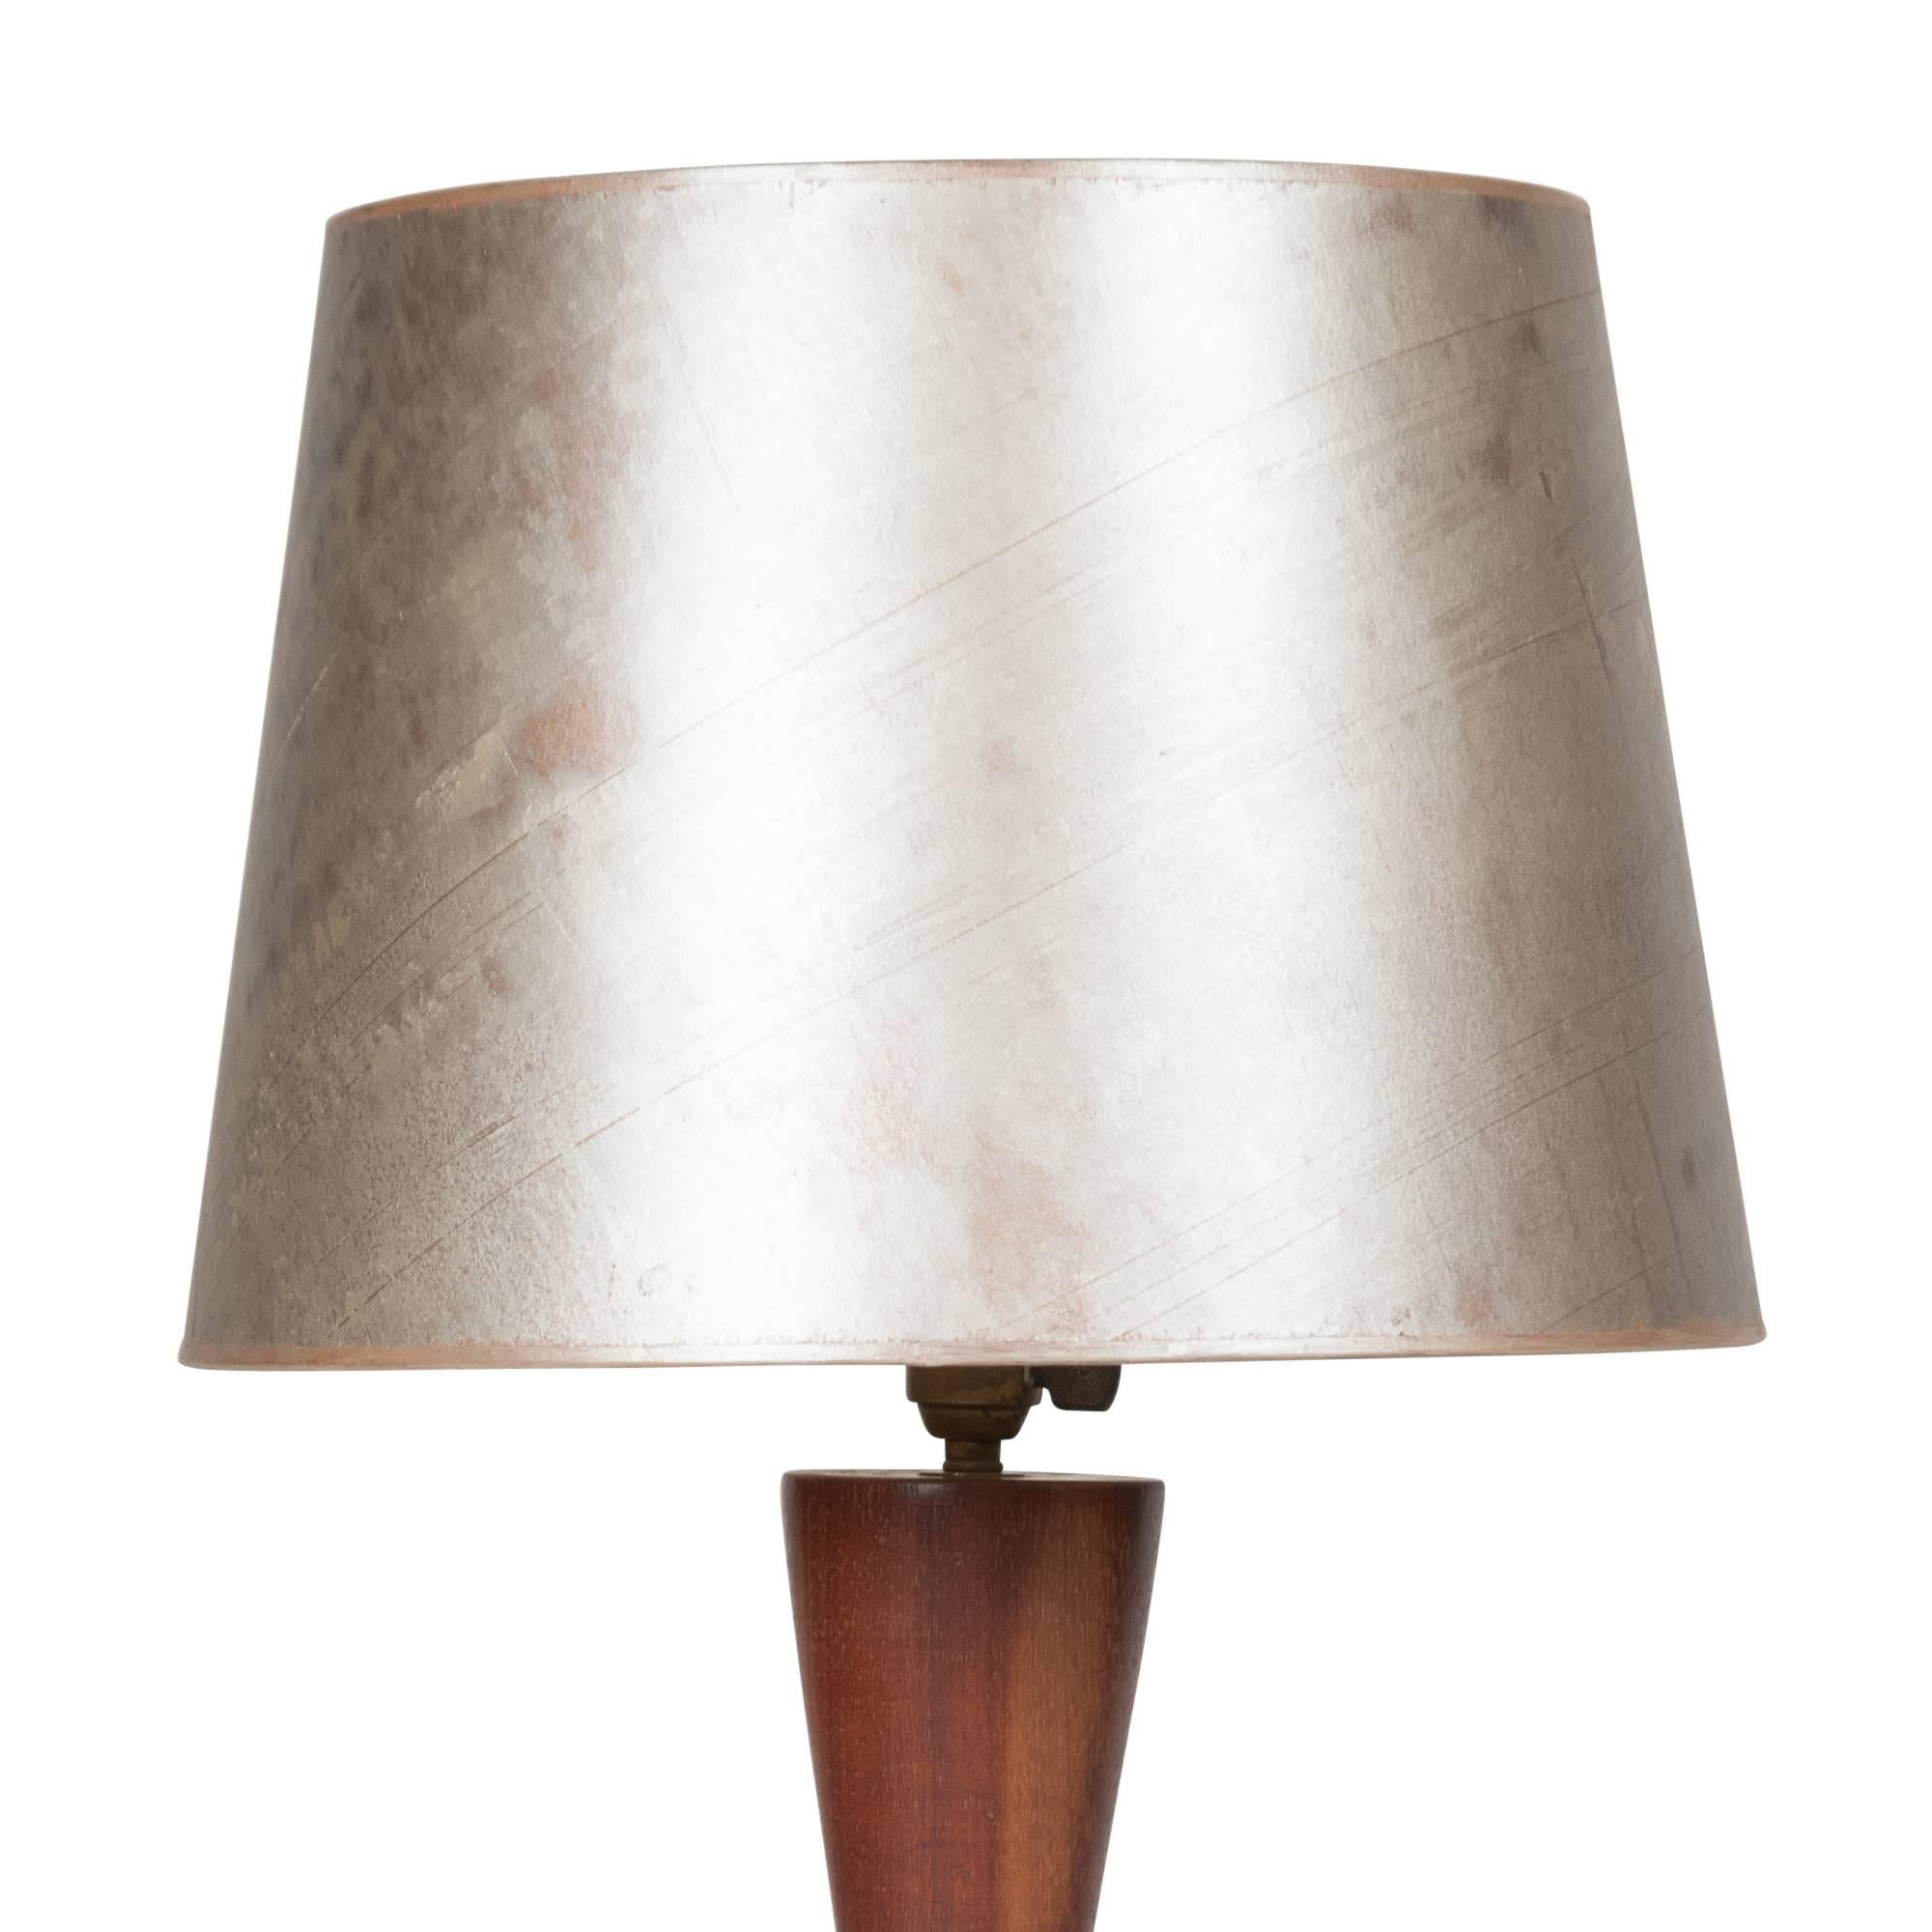 Turned Walnut Table Lamp, Danish, 1950s For Sale 3